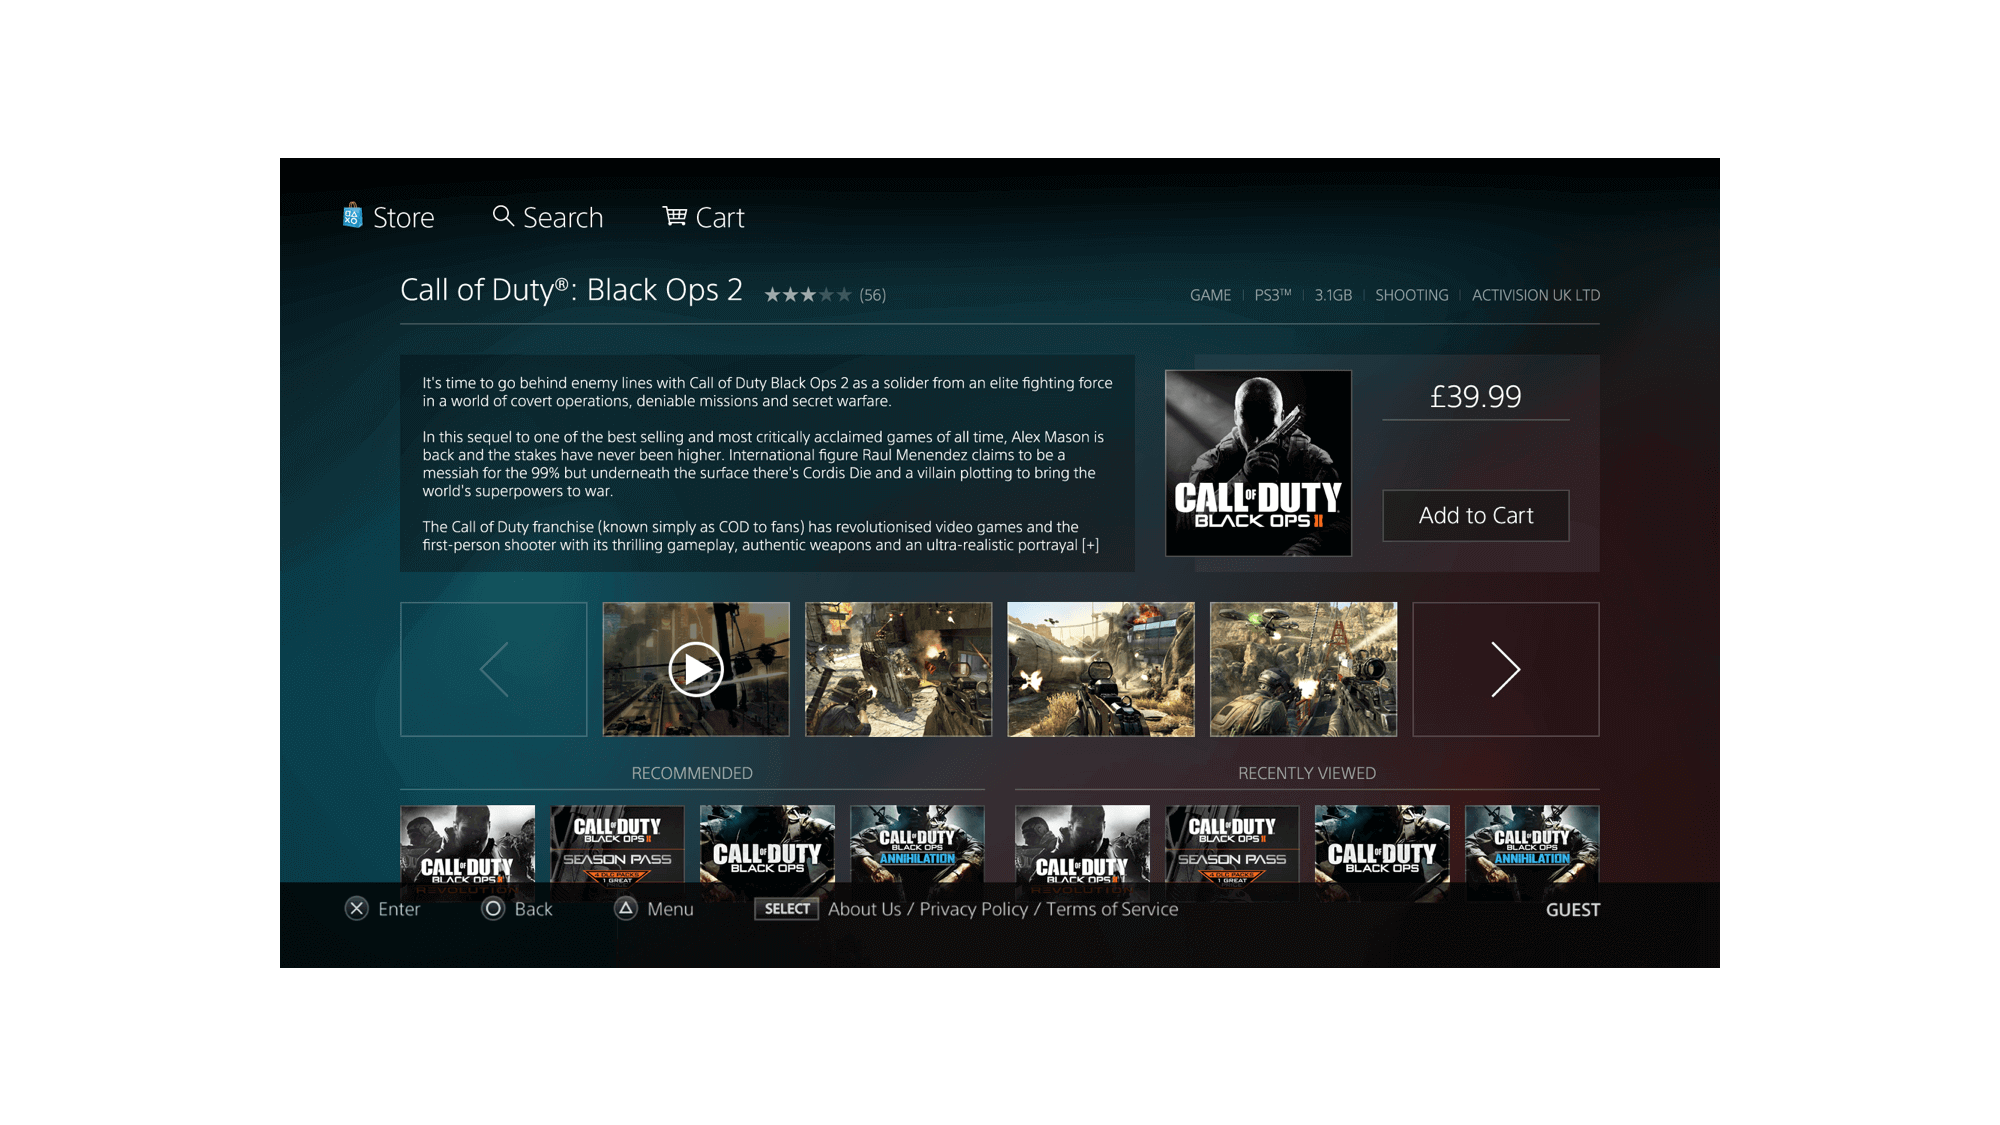 PlayStation Store UI product page concept